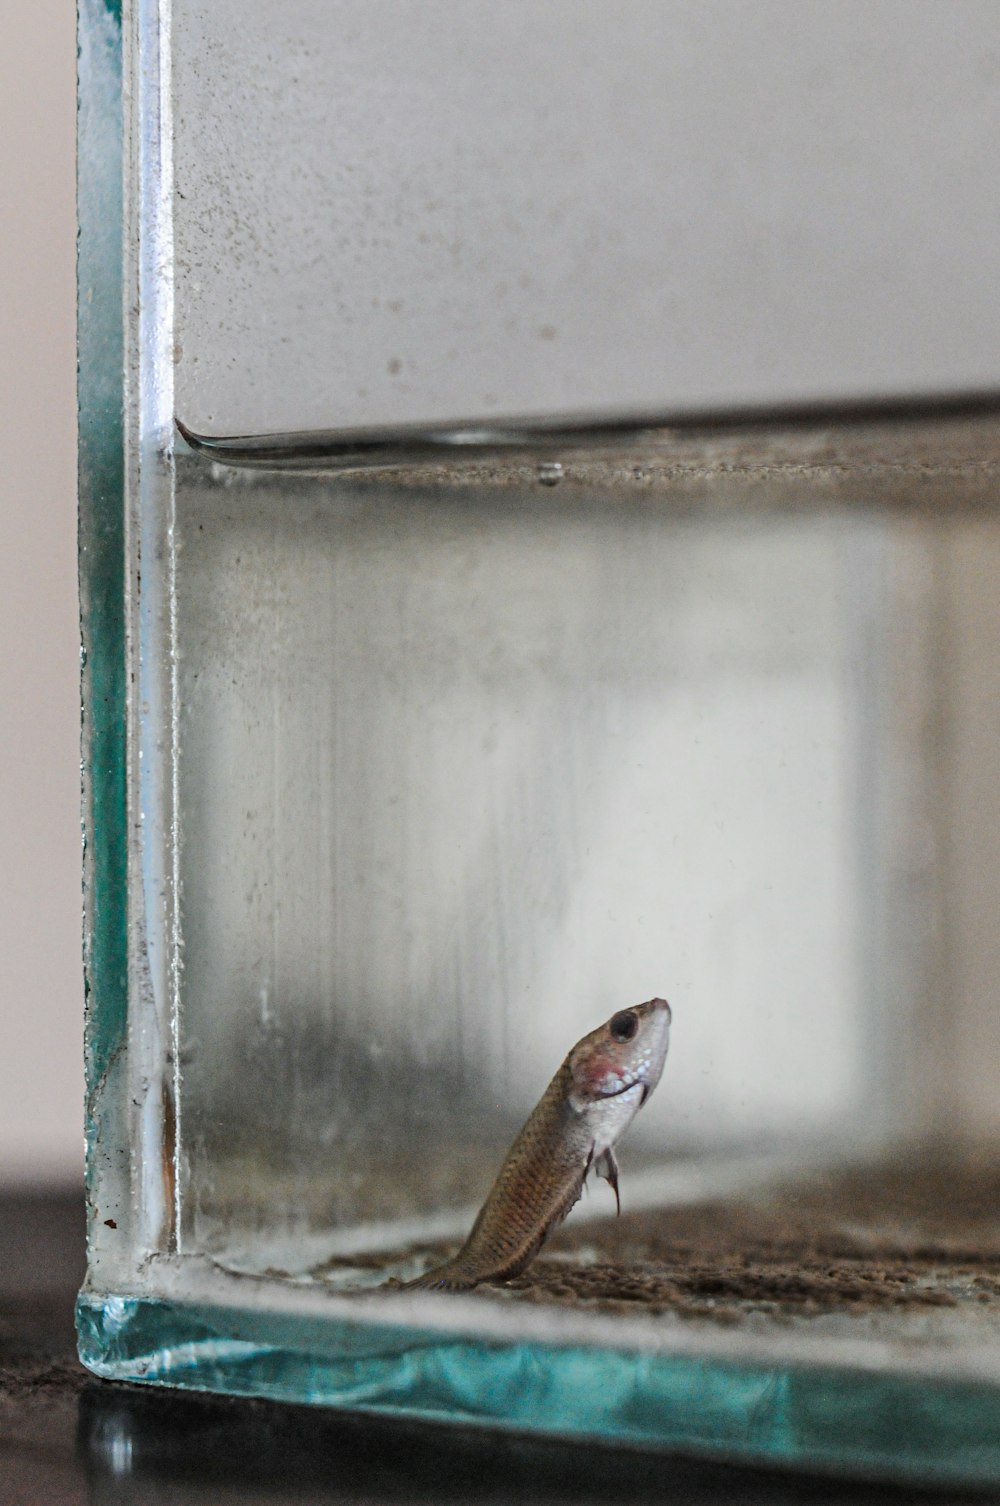 a small fish in a glass container on a table